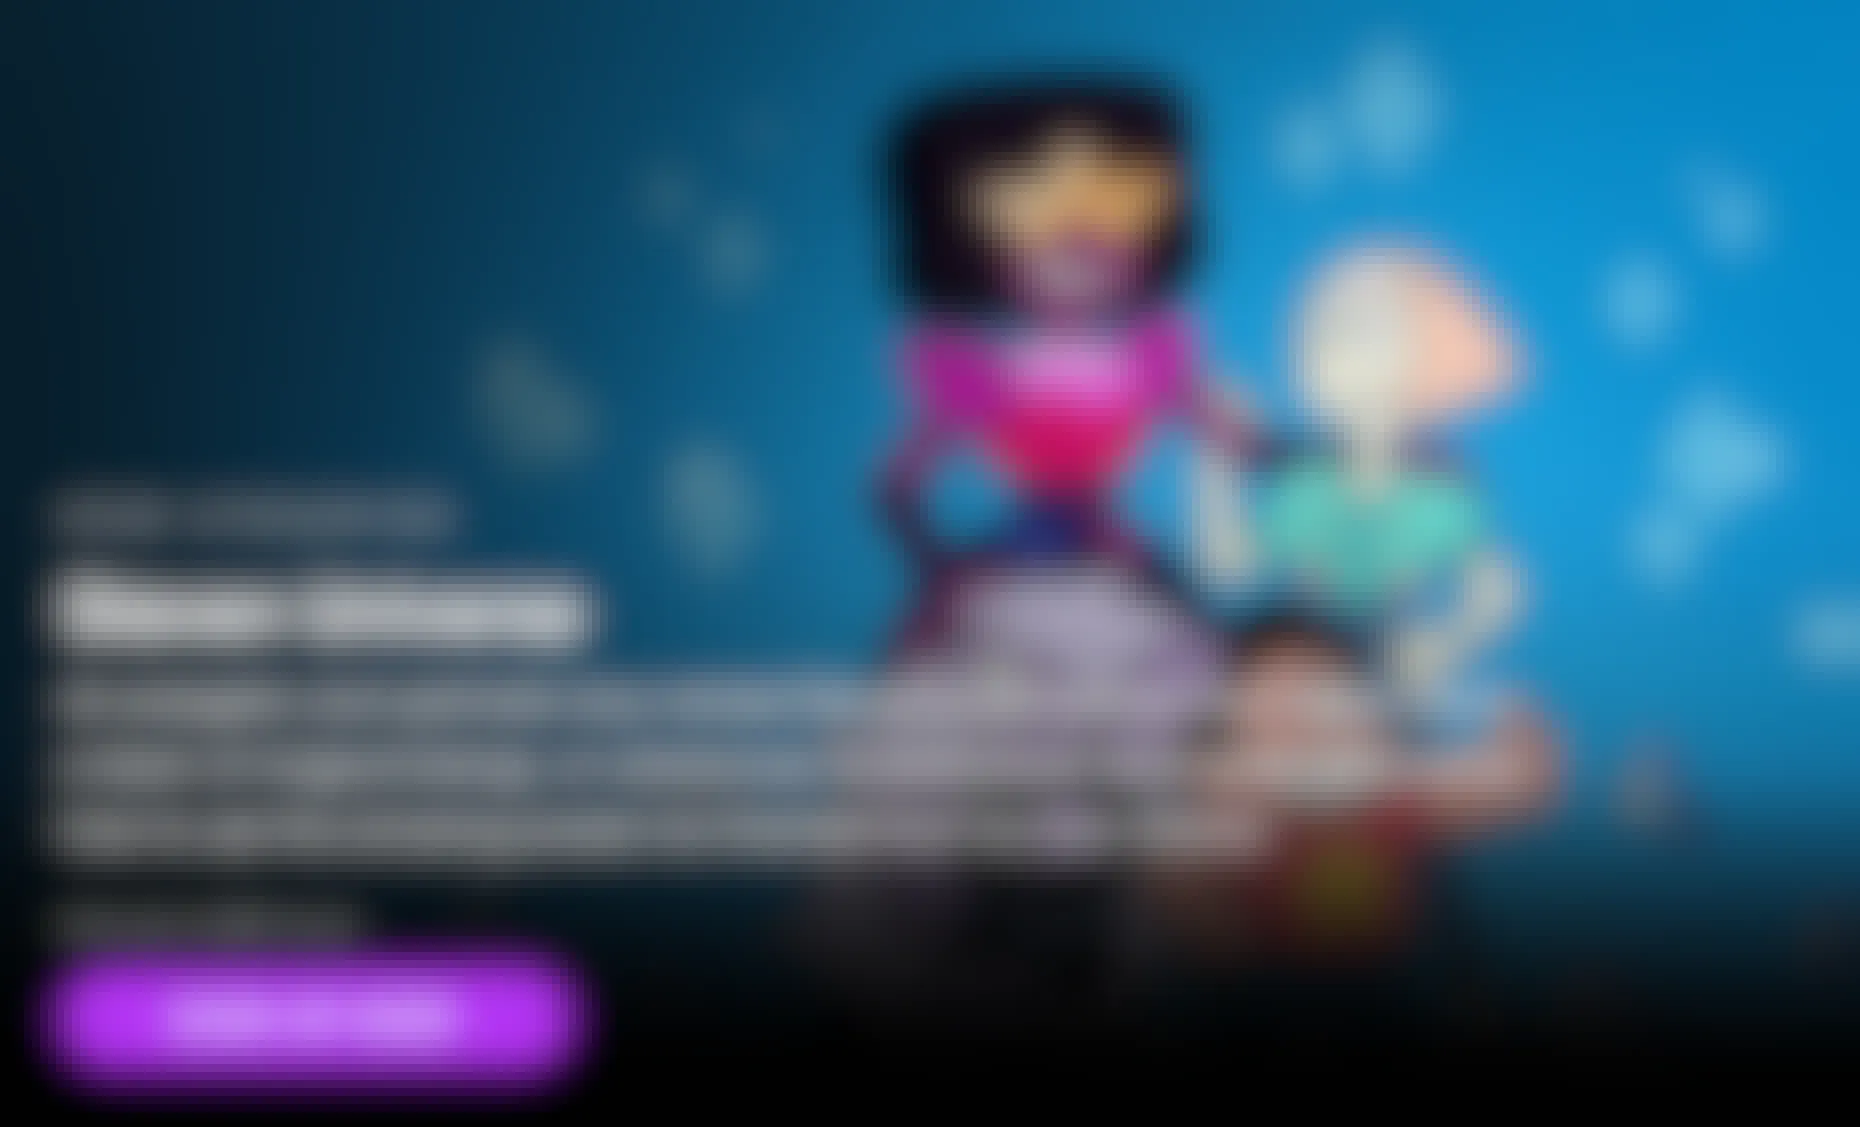 A screenshot of the HBO Max website with a Steven Universe promo banner.